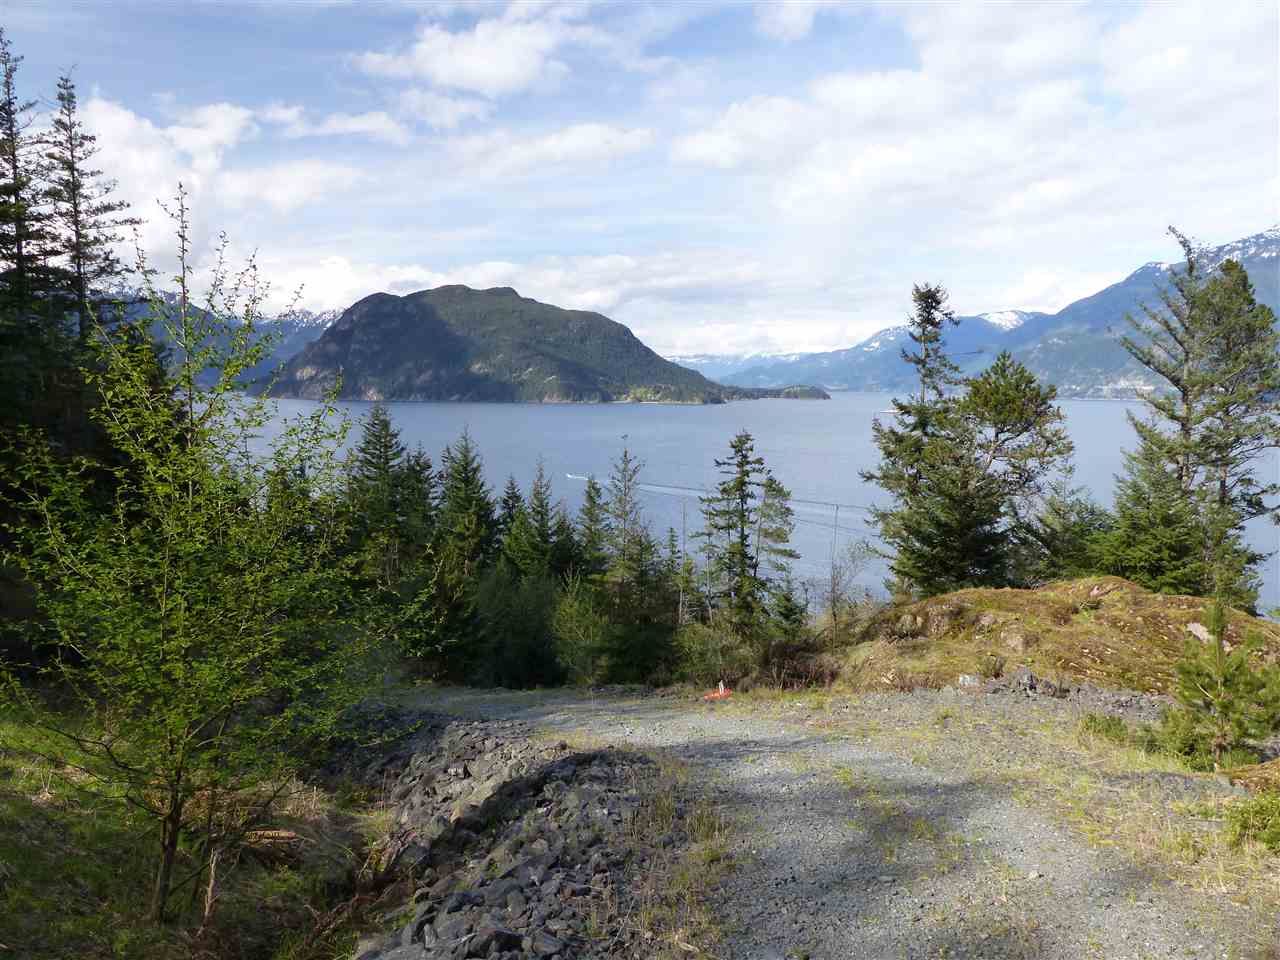 Main Photo: Lot 37 BRIGADE BAY in : Gambier Island Land for sale : MLS®# R2265062